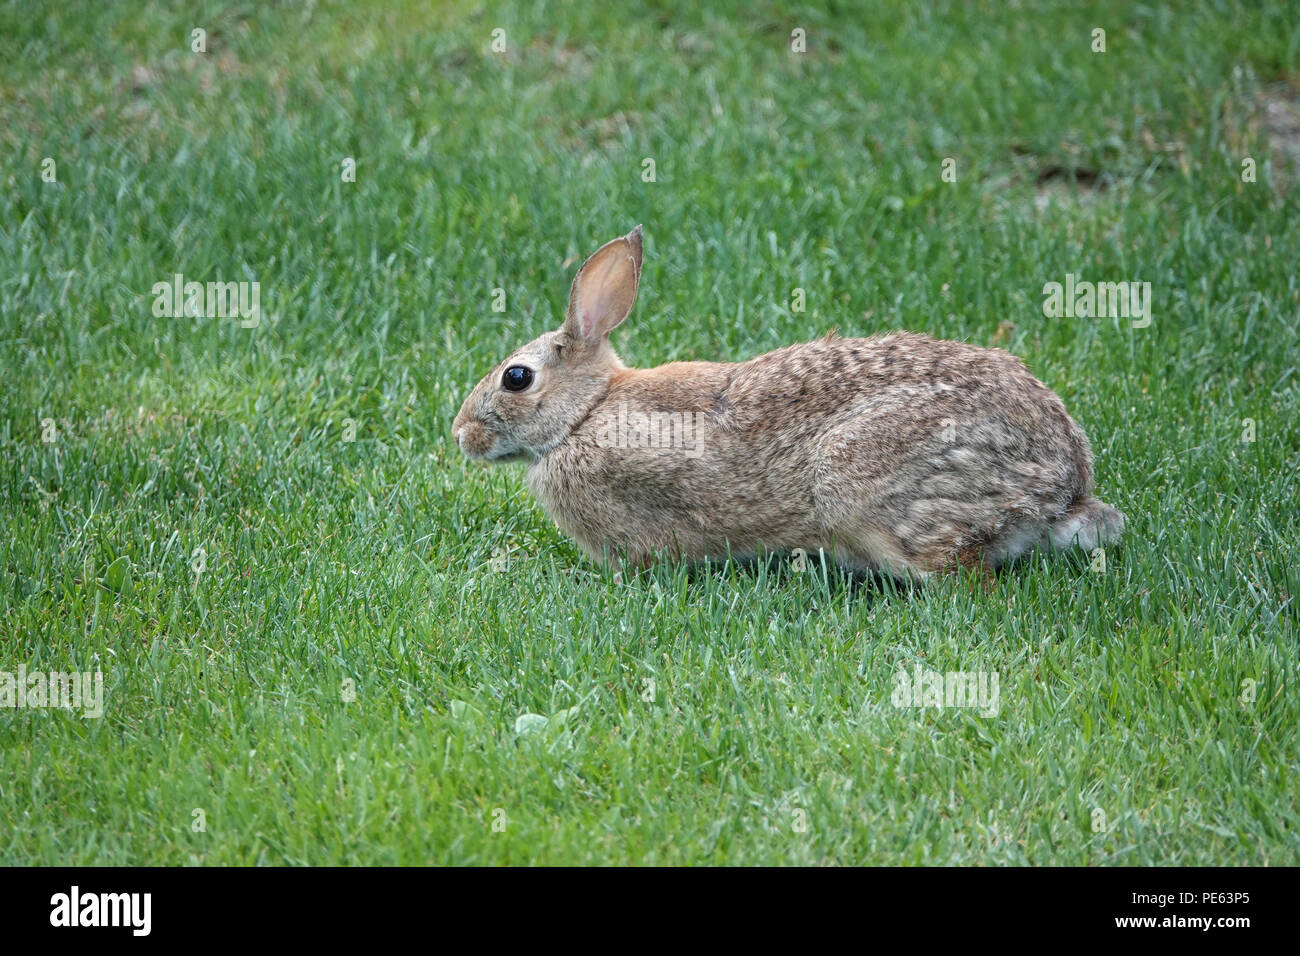 Adult eastern cottontail rabbit (Sylvilagus floridanus) on grass in Bellevue, WA, USA Stock Photo